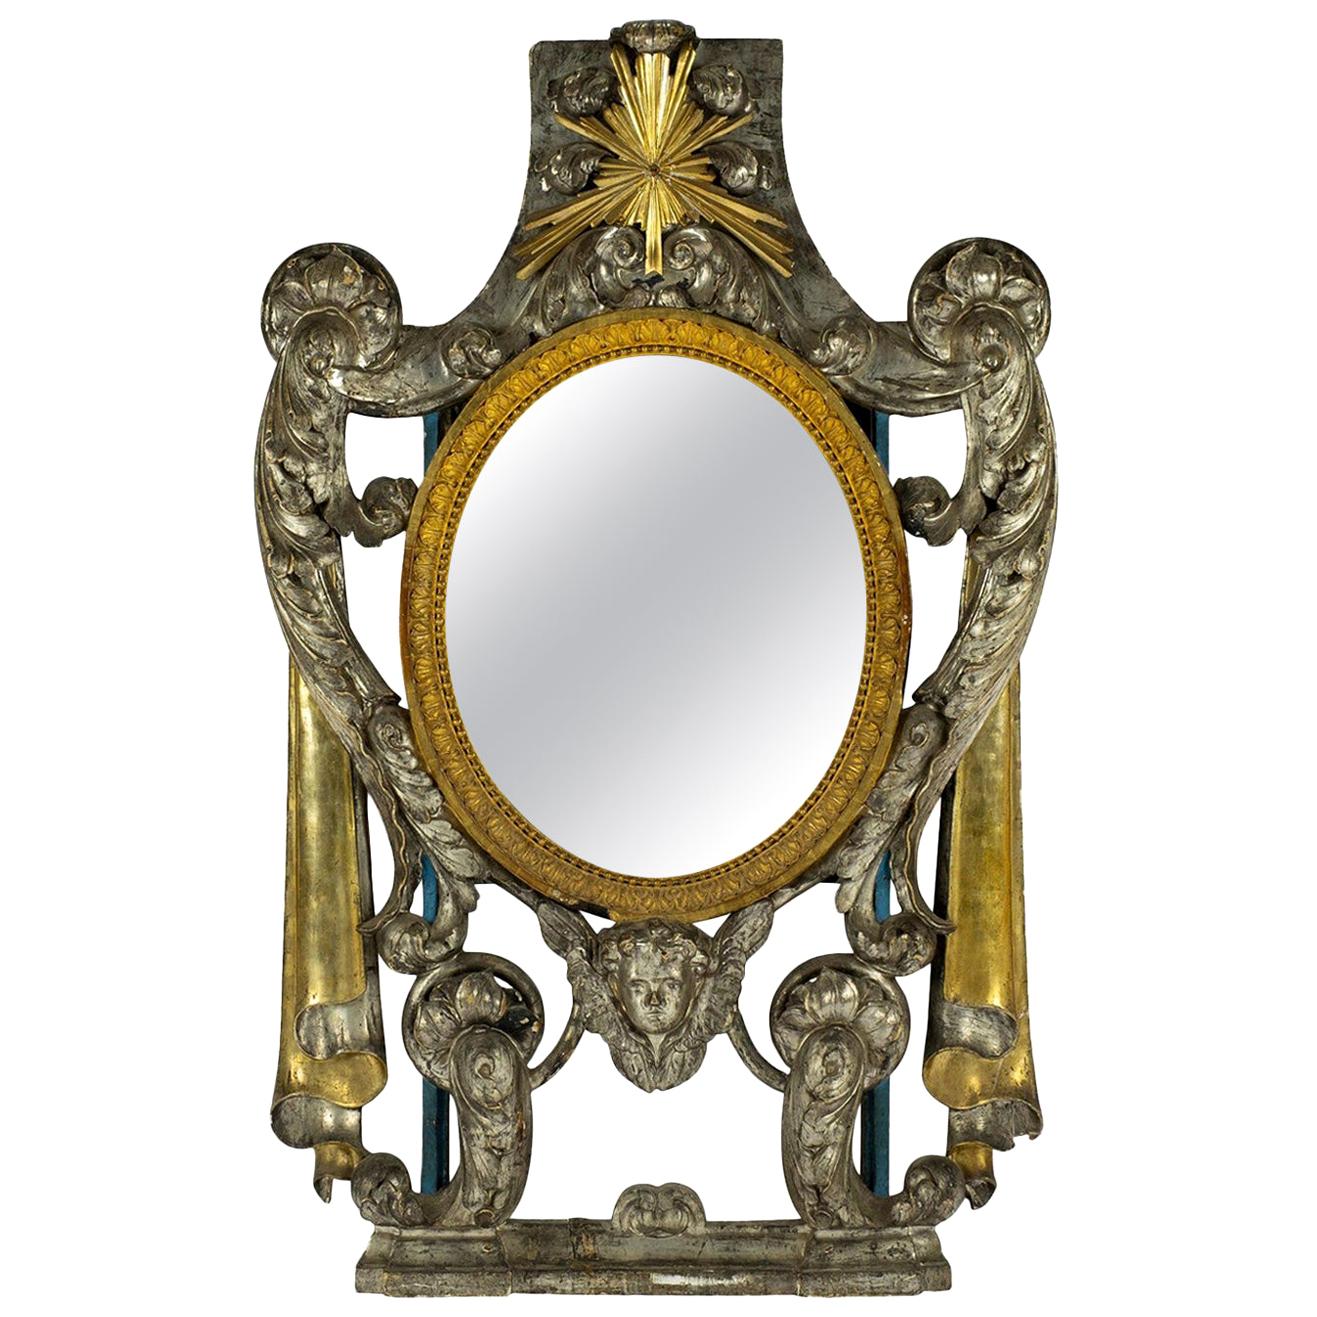 17th Century French Renaissance Silver and Gold Giltwood Mirror